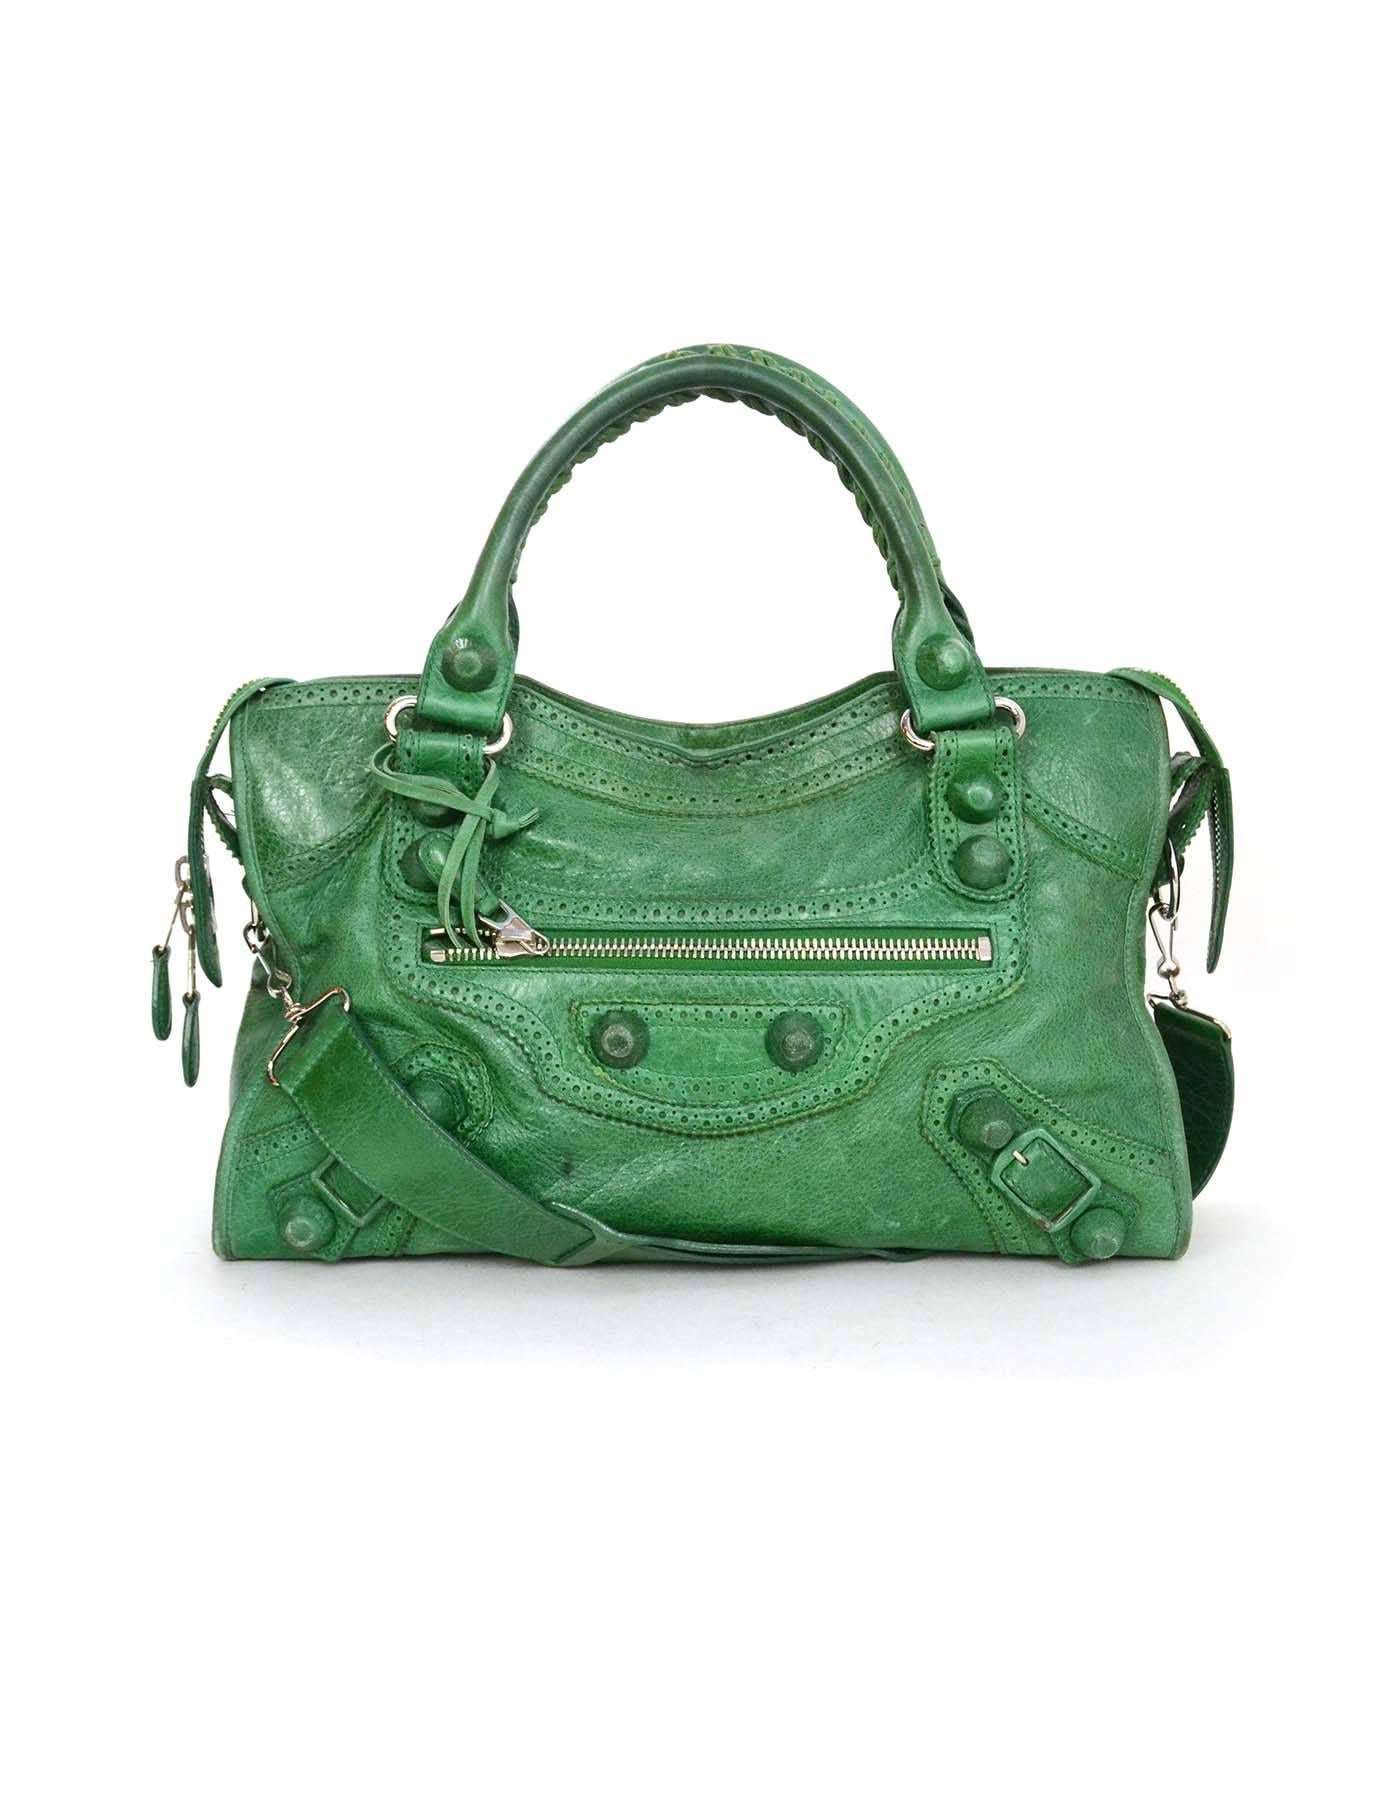 Balenciaga Green Leather Giant Brogues Covered Motorcycle City Bag
Features a detachable shoulder strap

    Made In: Italy

    Color: Green

    Hardware: Silvertone

    Materials: Leather, Metal

    Lining: Black cotton blend